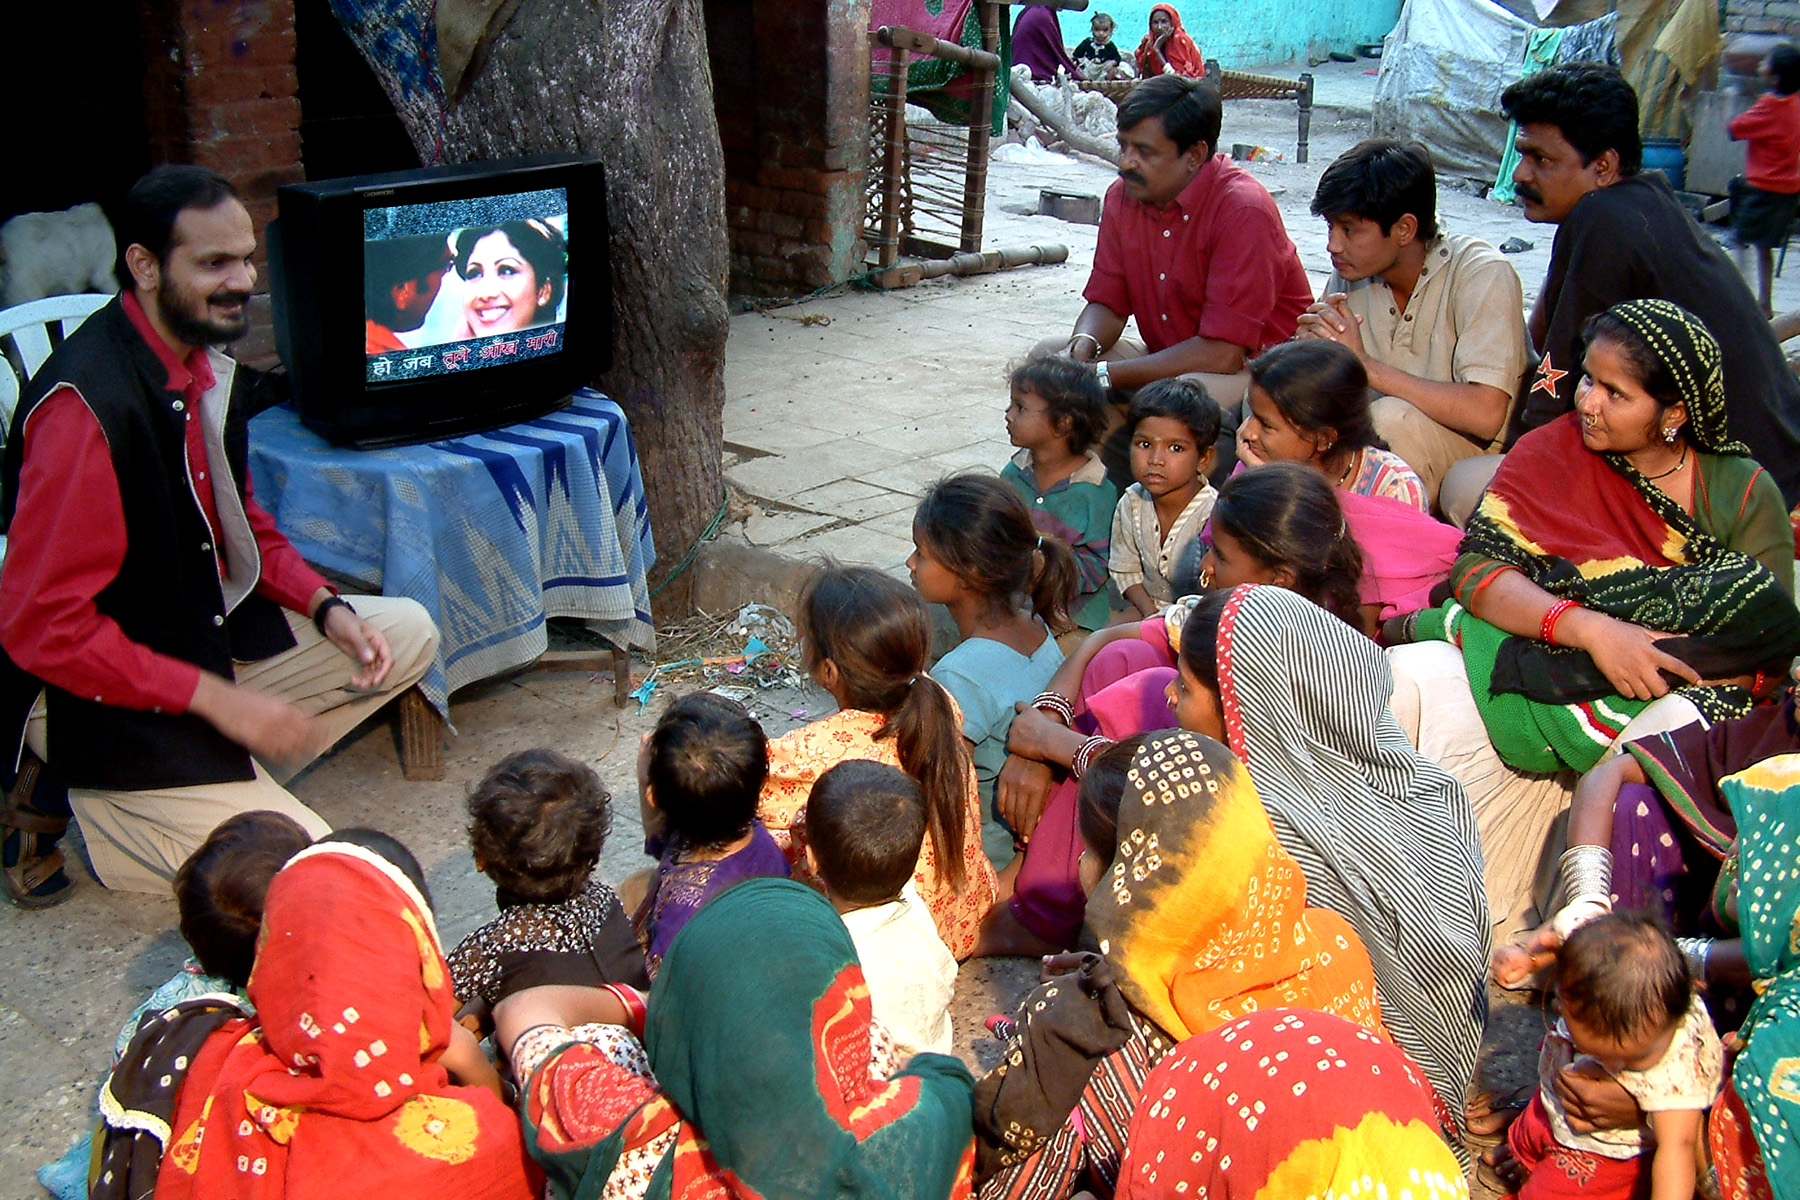 Indian people gathered around a television-entertainment education